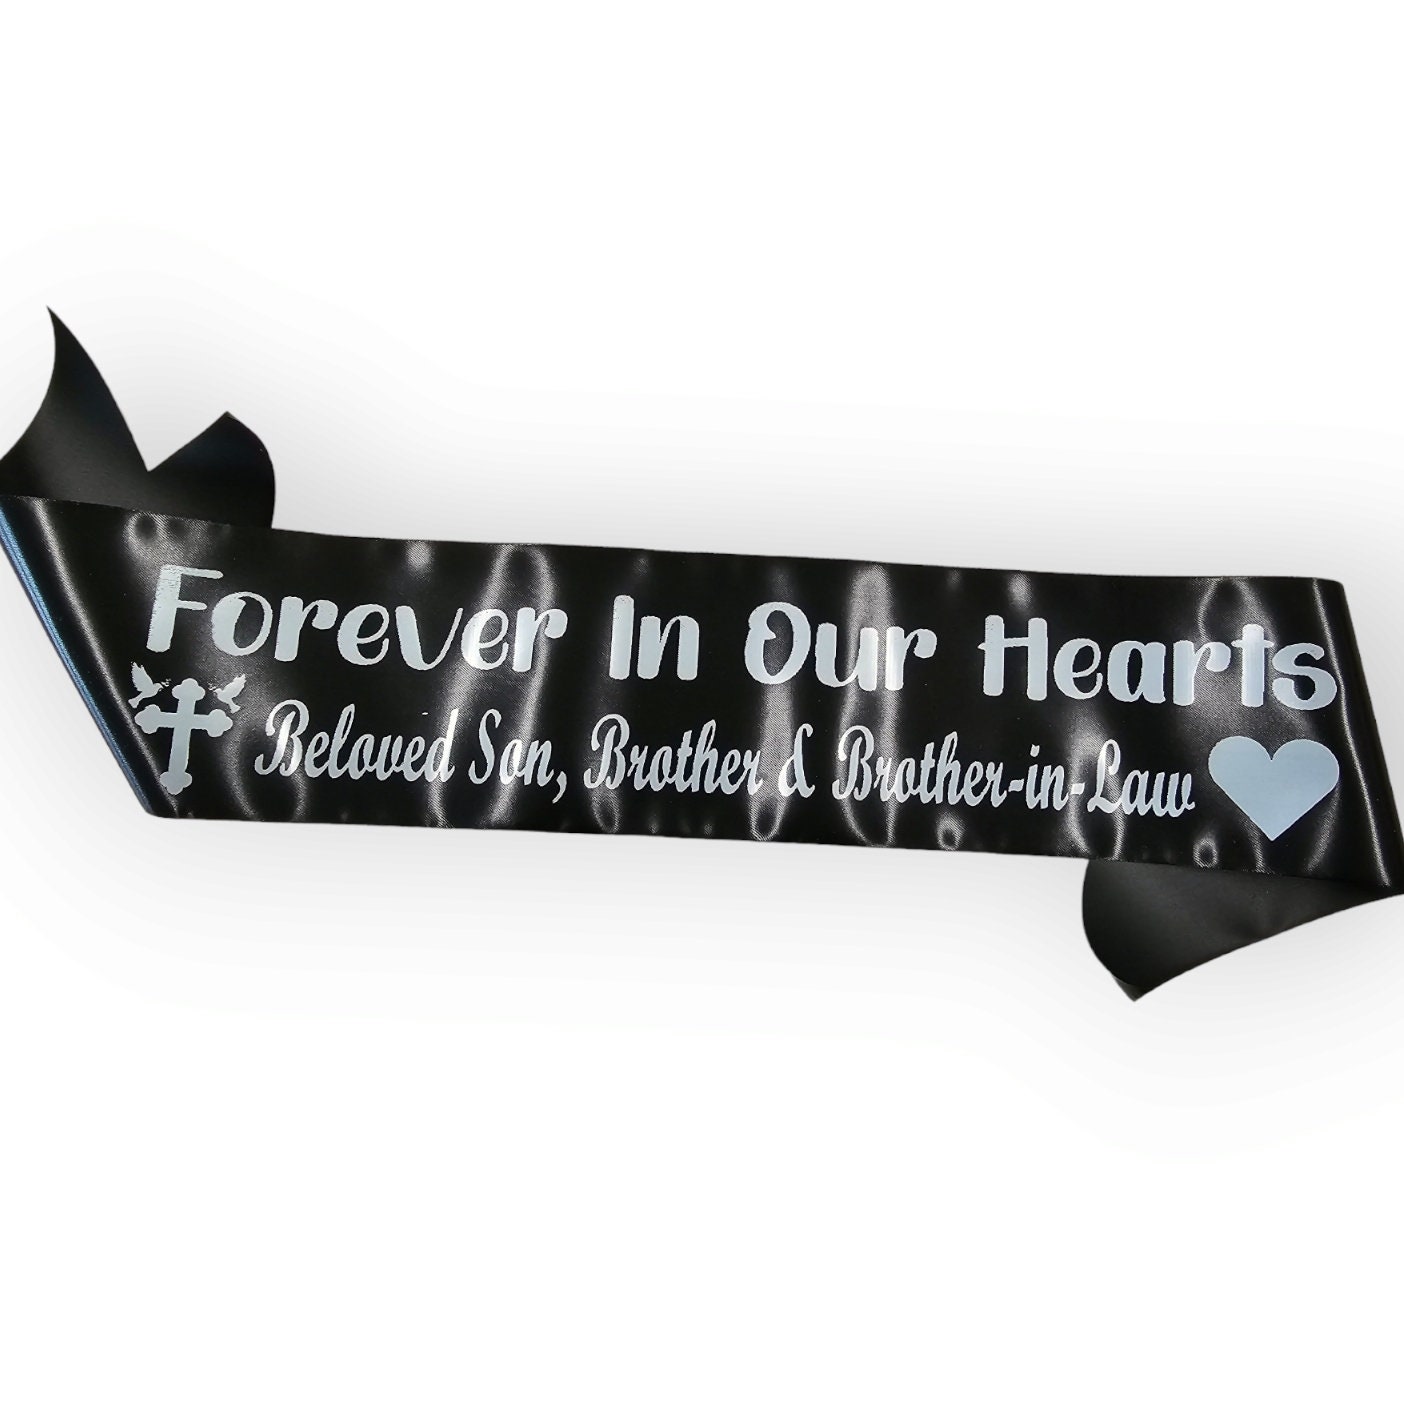 Personalized Memorial Funeral Sash Ribbon or Celebration of picture